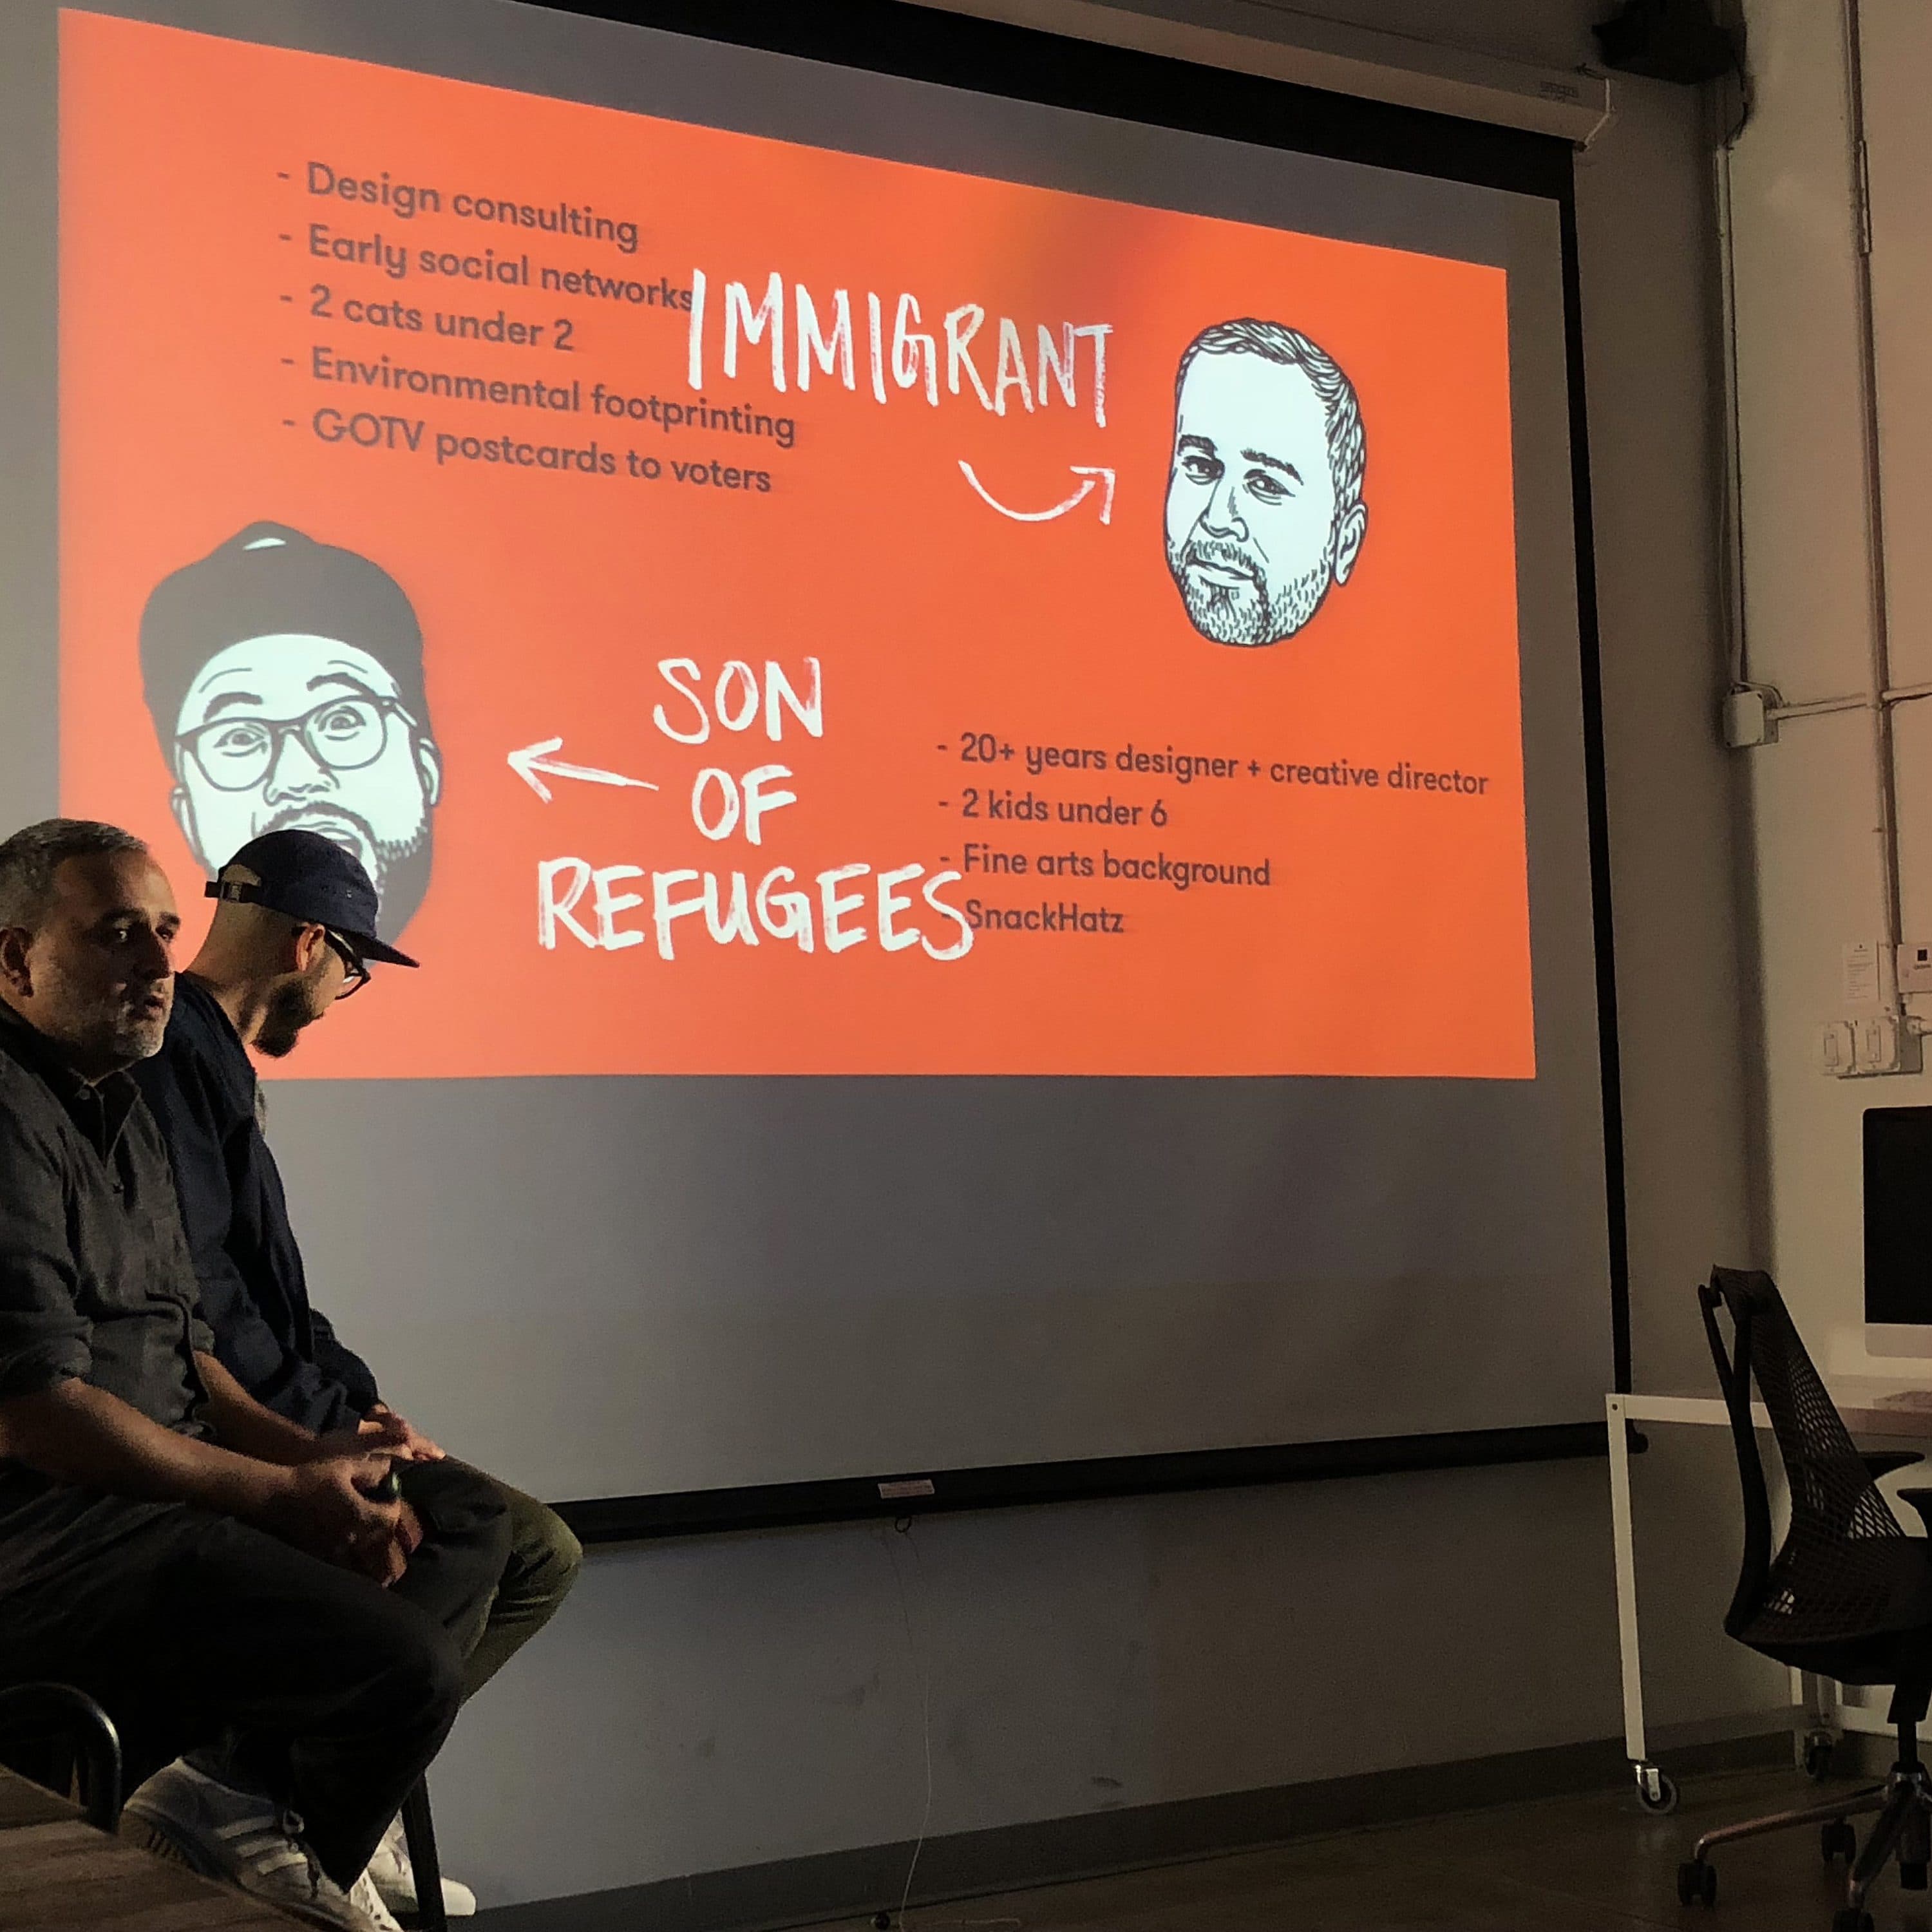 Two people are sitting in a classroom, giving a presentation. A projector screen displays cartoon-style graphics of two individuals with text. The text includes bullet points about design consulting, social networks, being an immigrant, and years of experience.